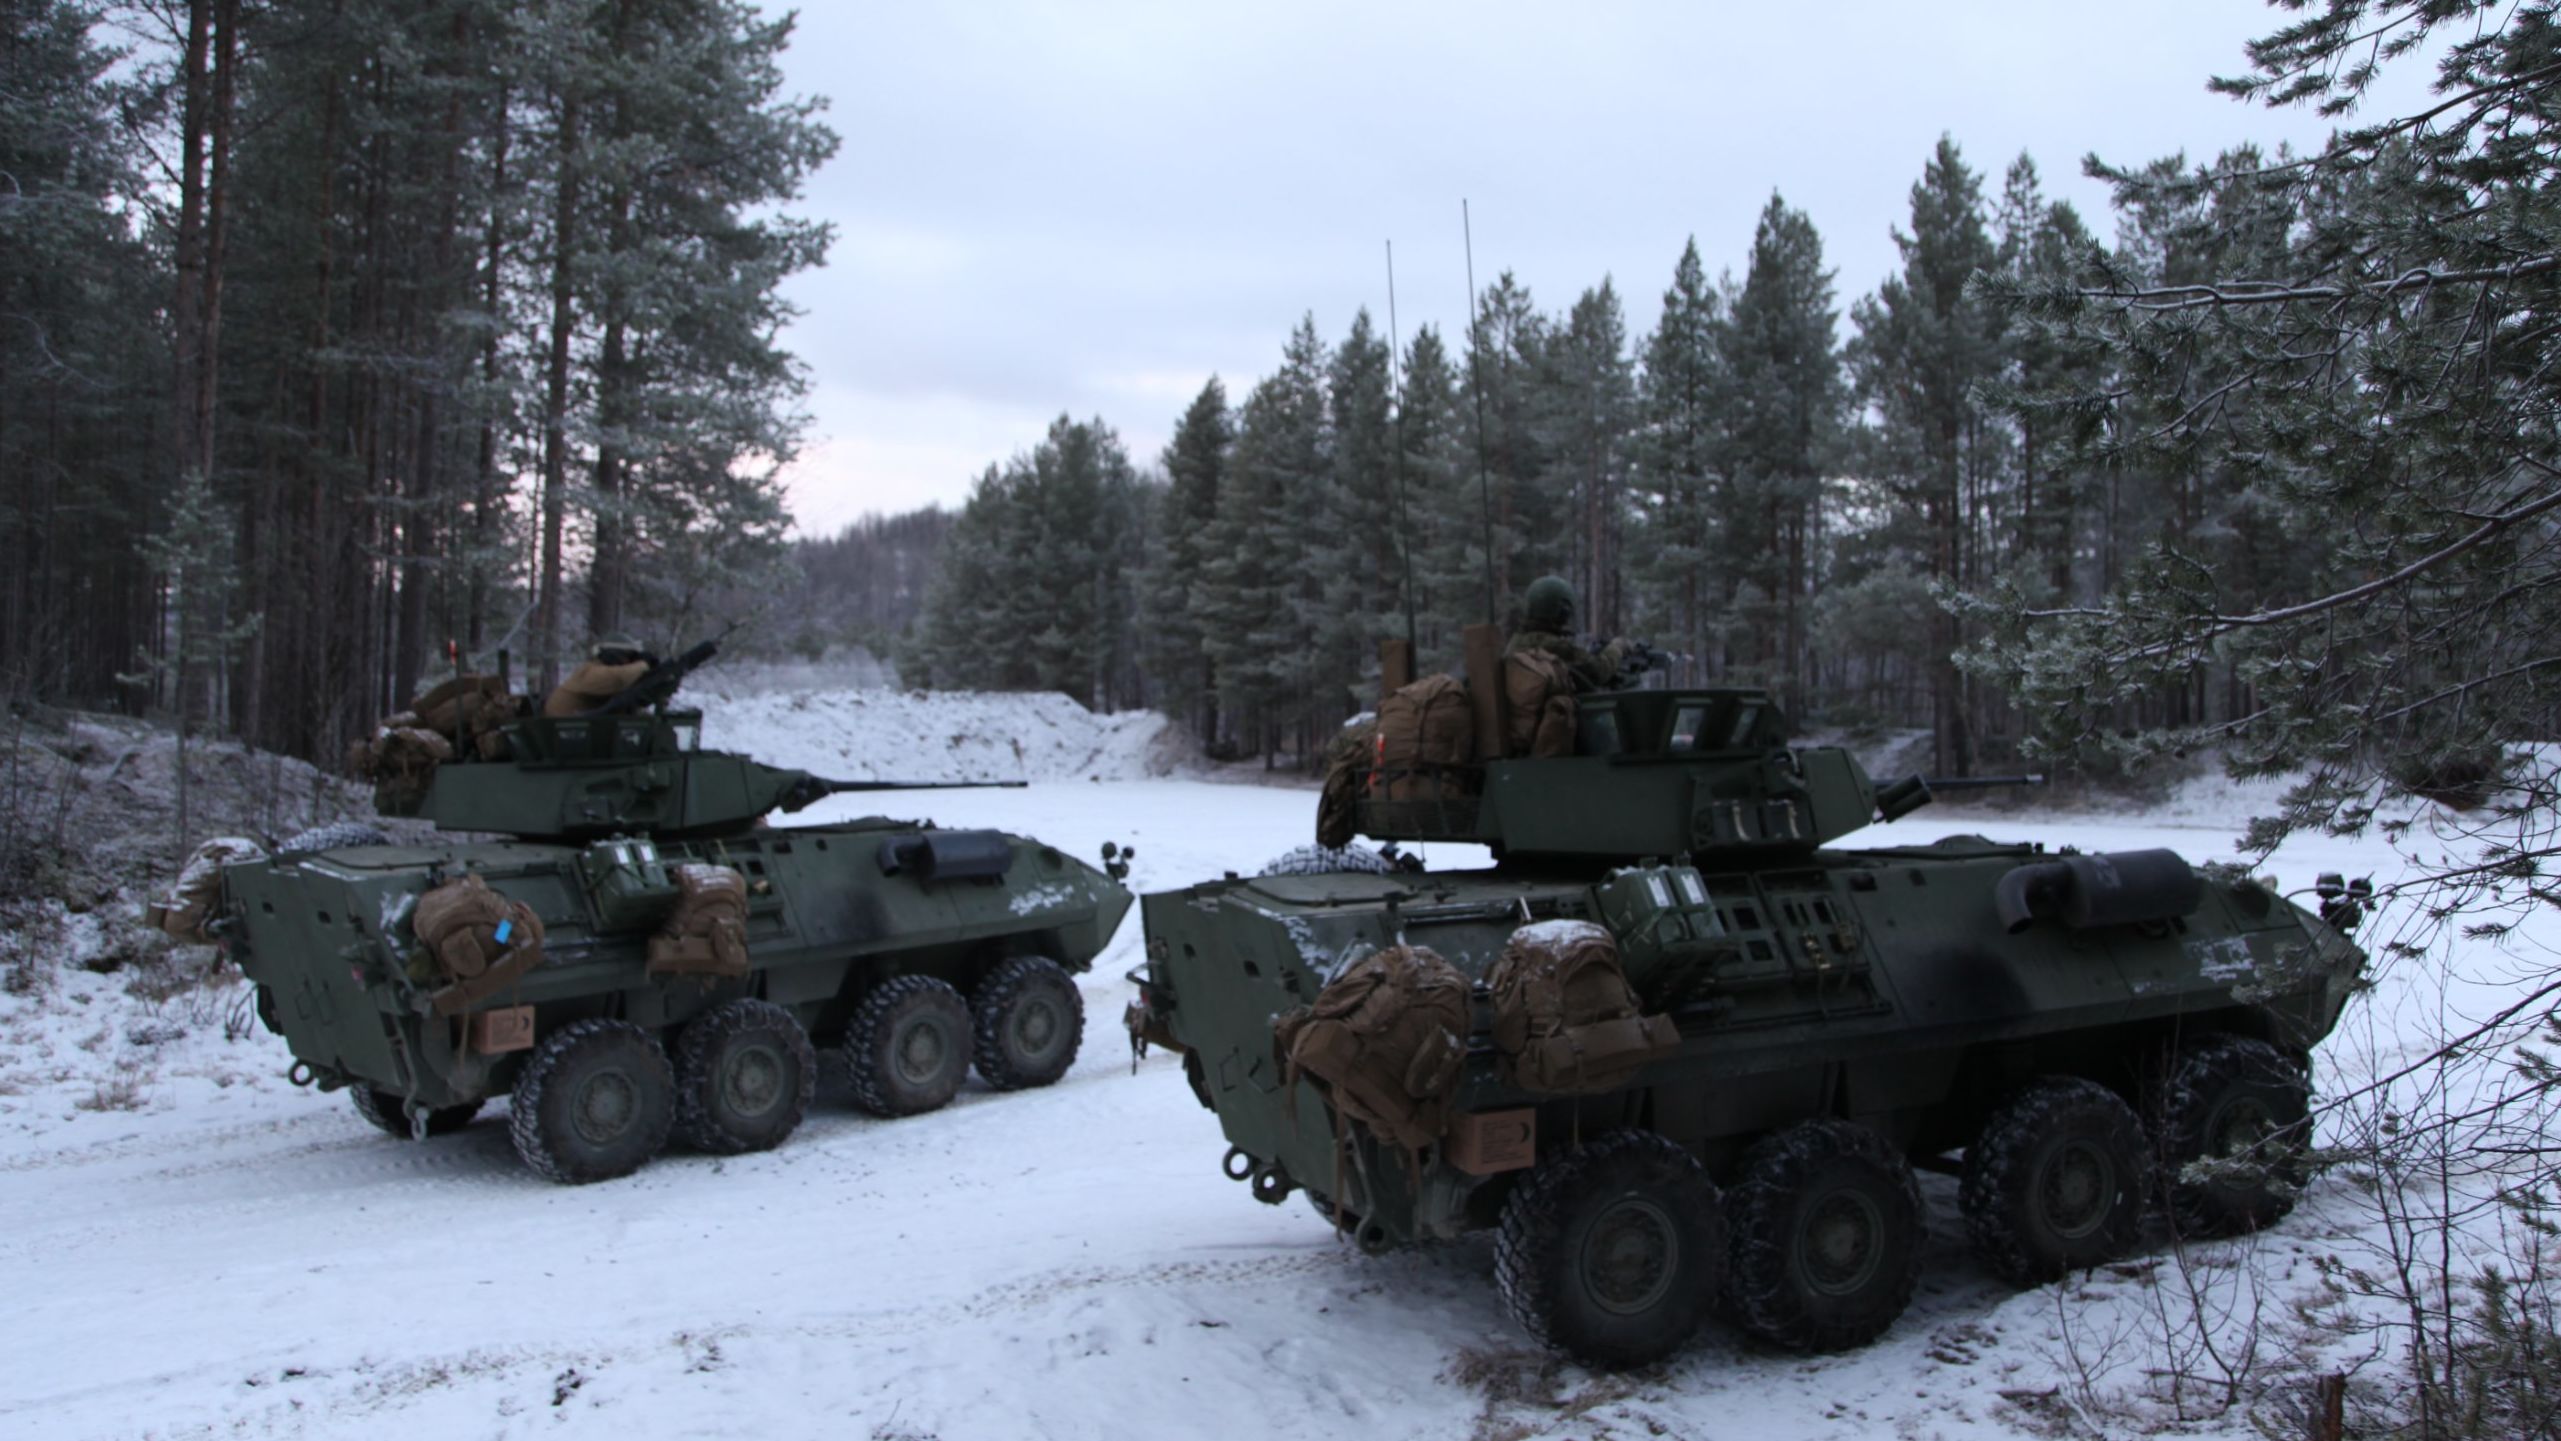 US Marines take part in an exercise with Norwegian troops in subzero temperatures above the Arctic Circle.